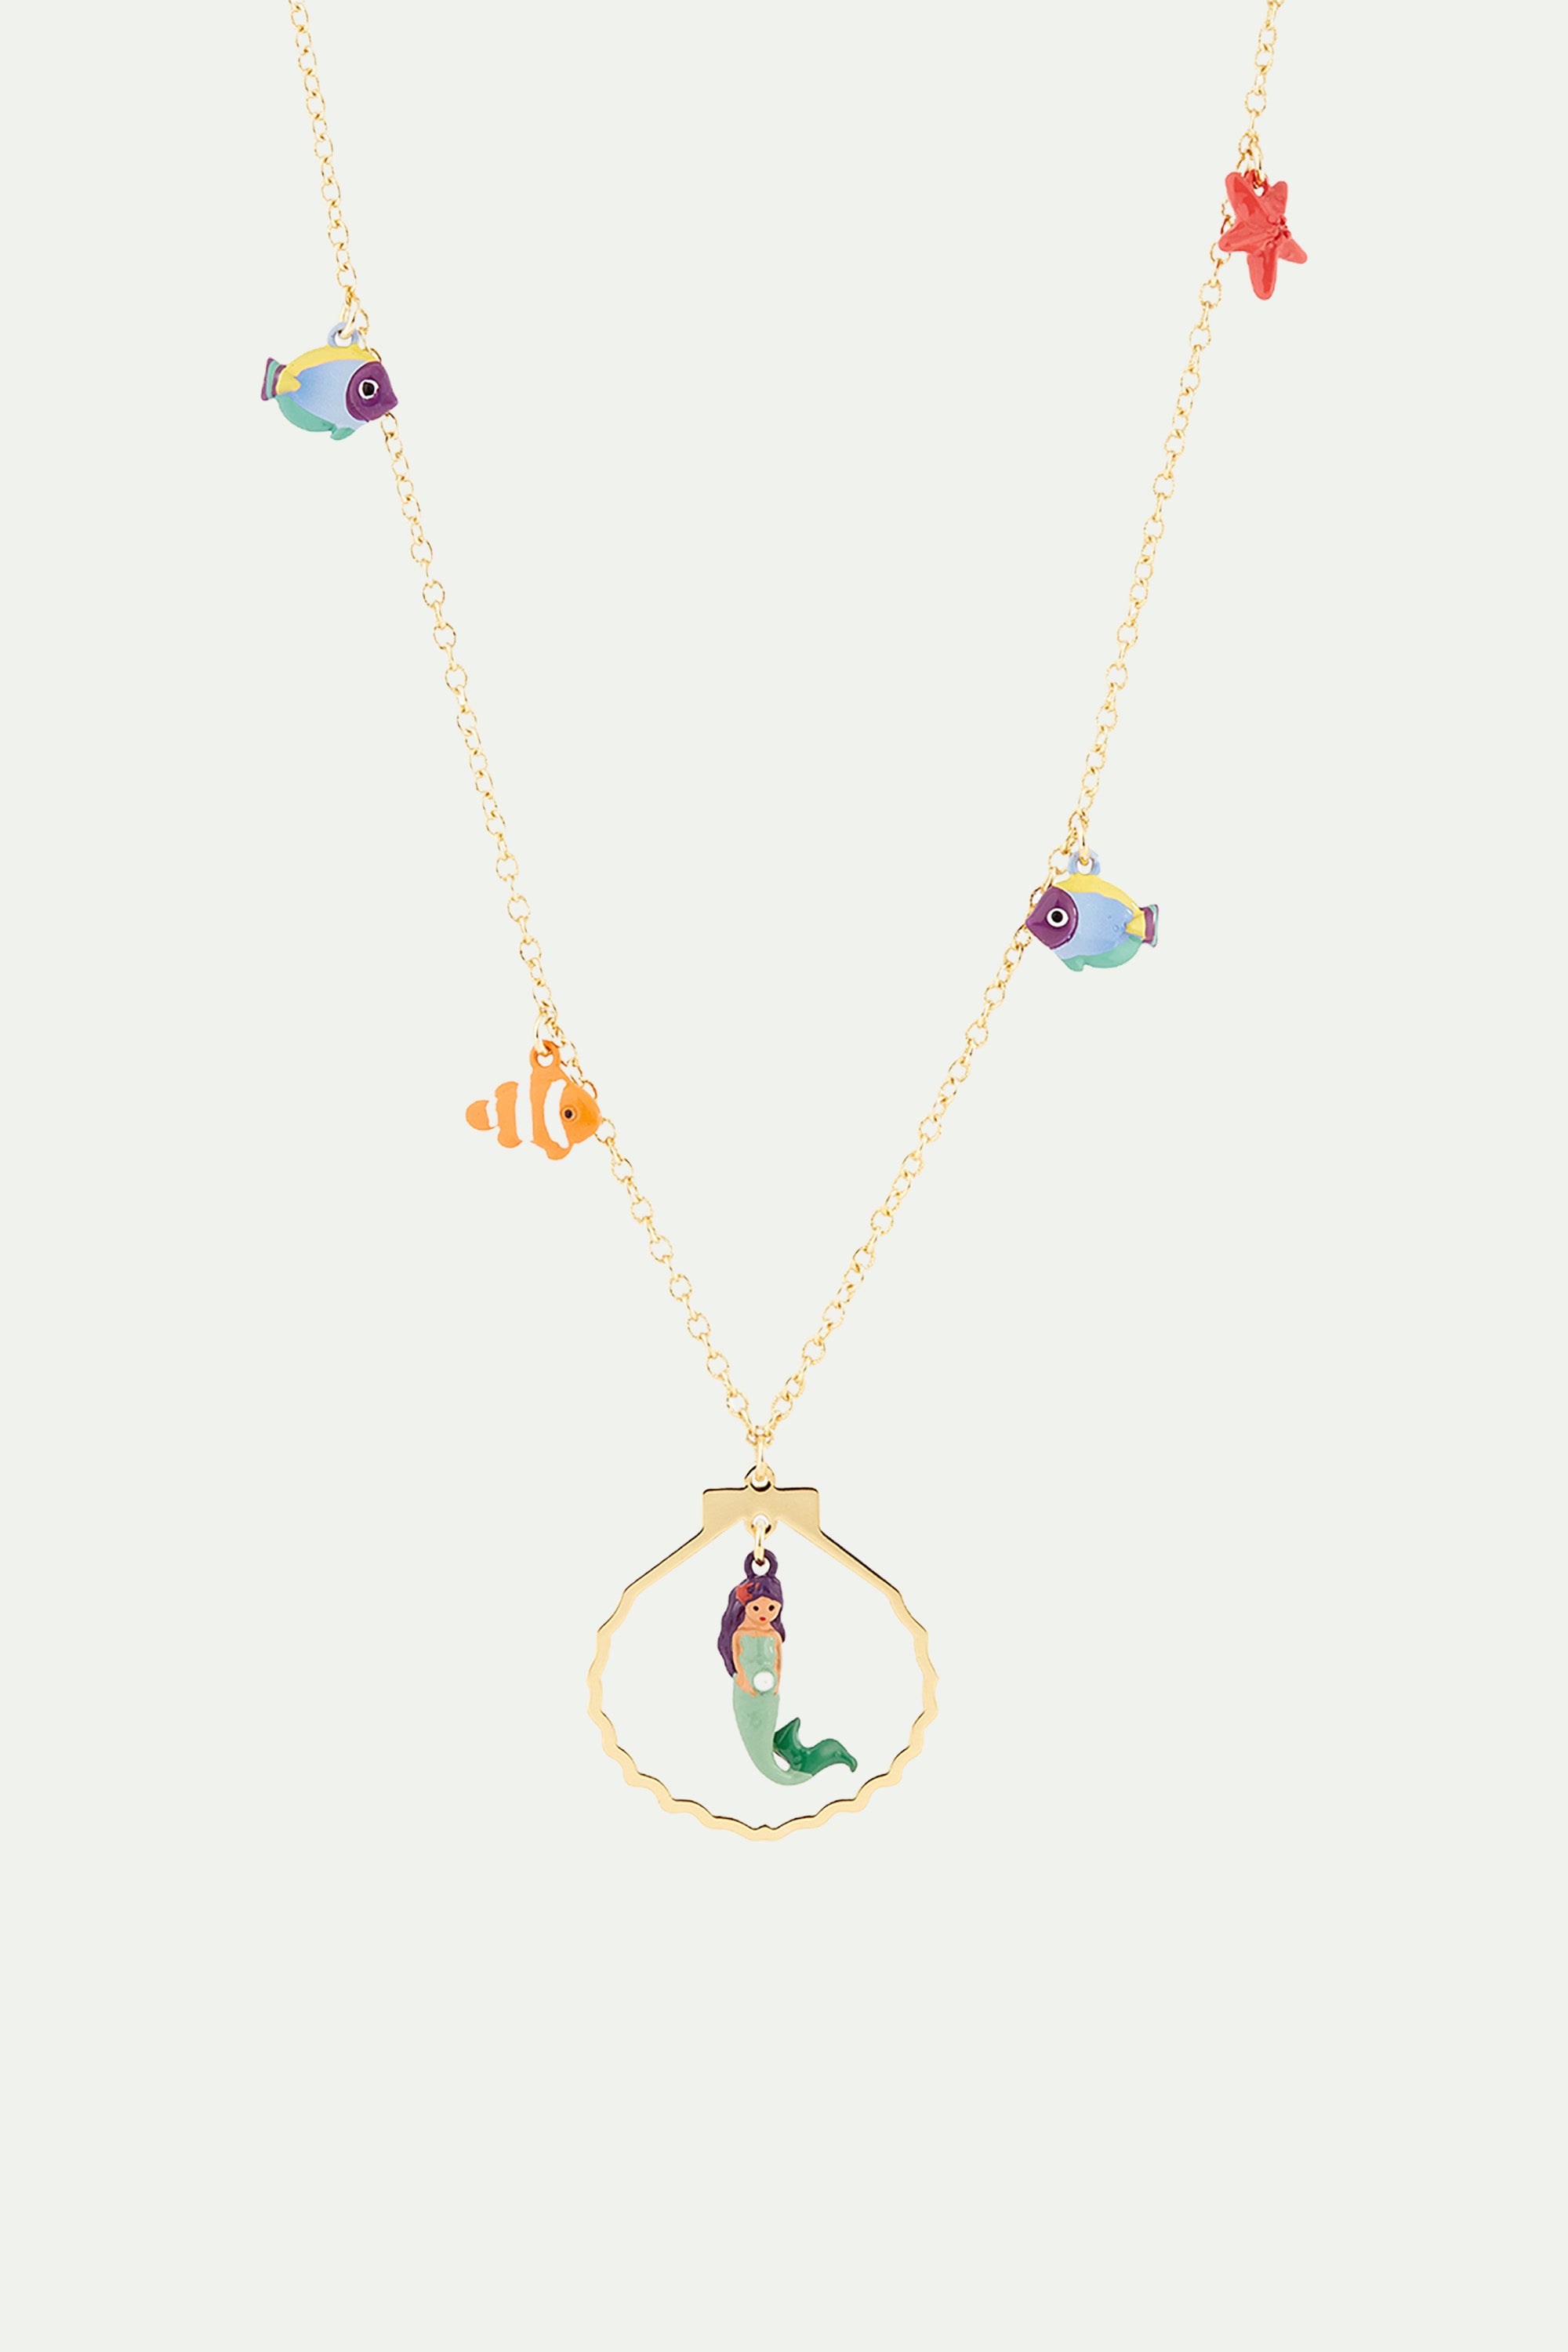 Mermaid and fish charm necklace